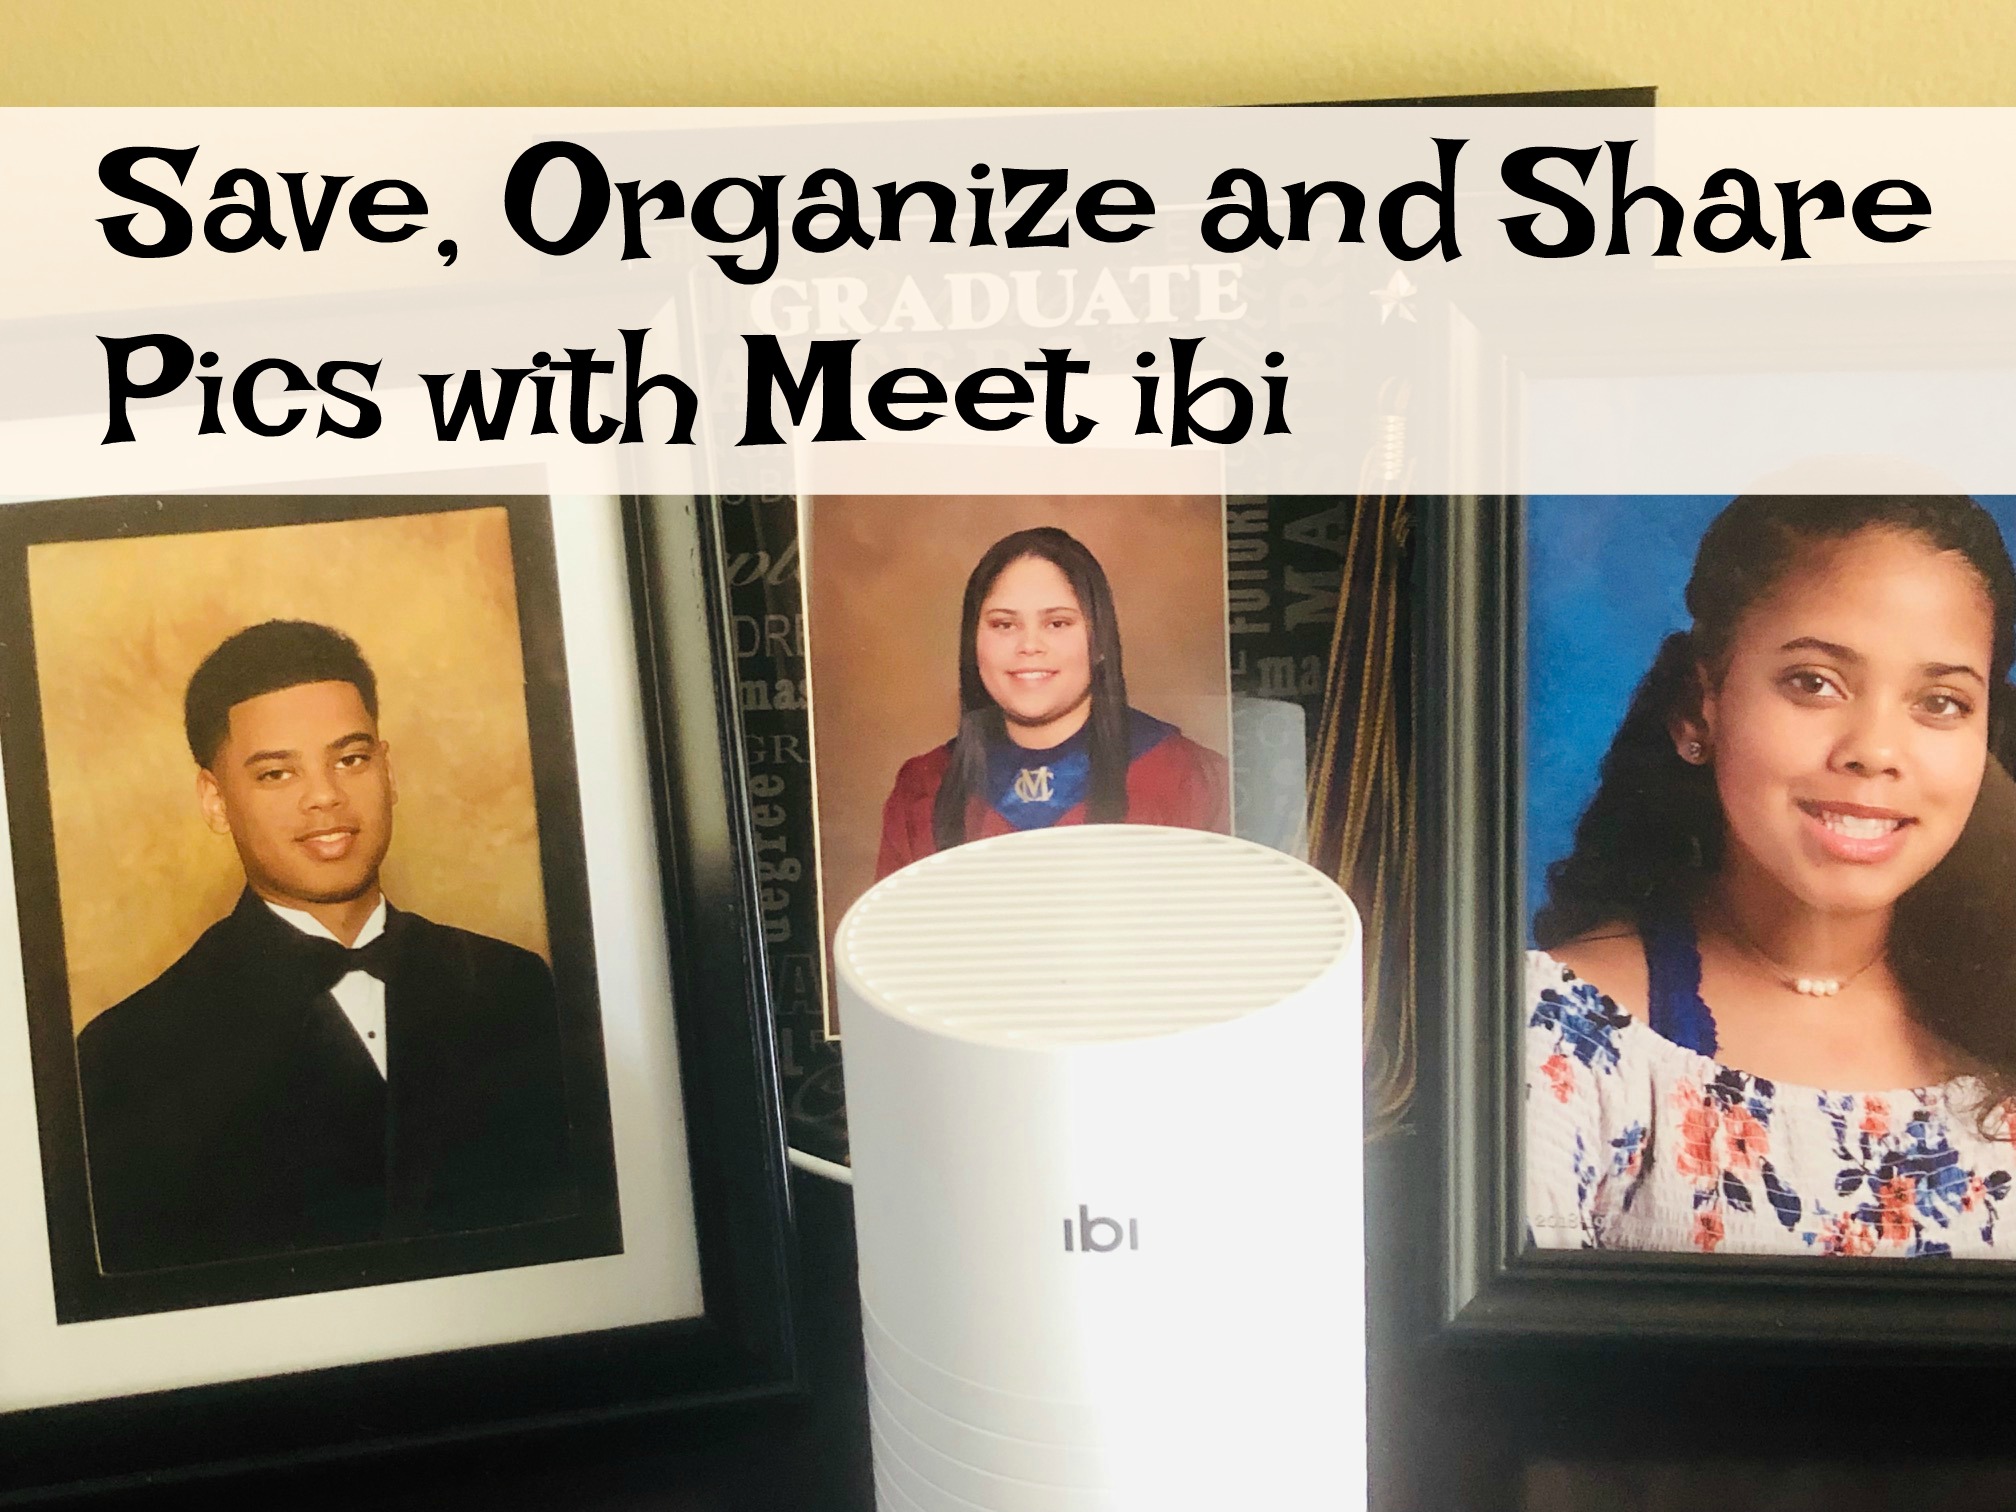 Save, Organize and Share Pics with Meet ibi